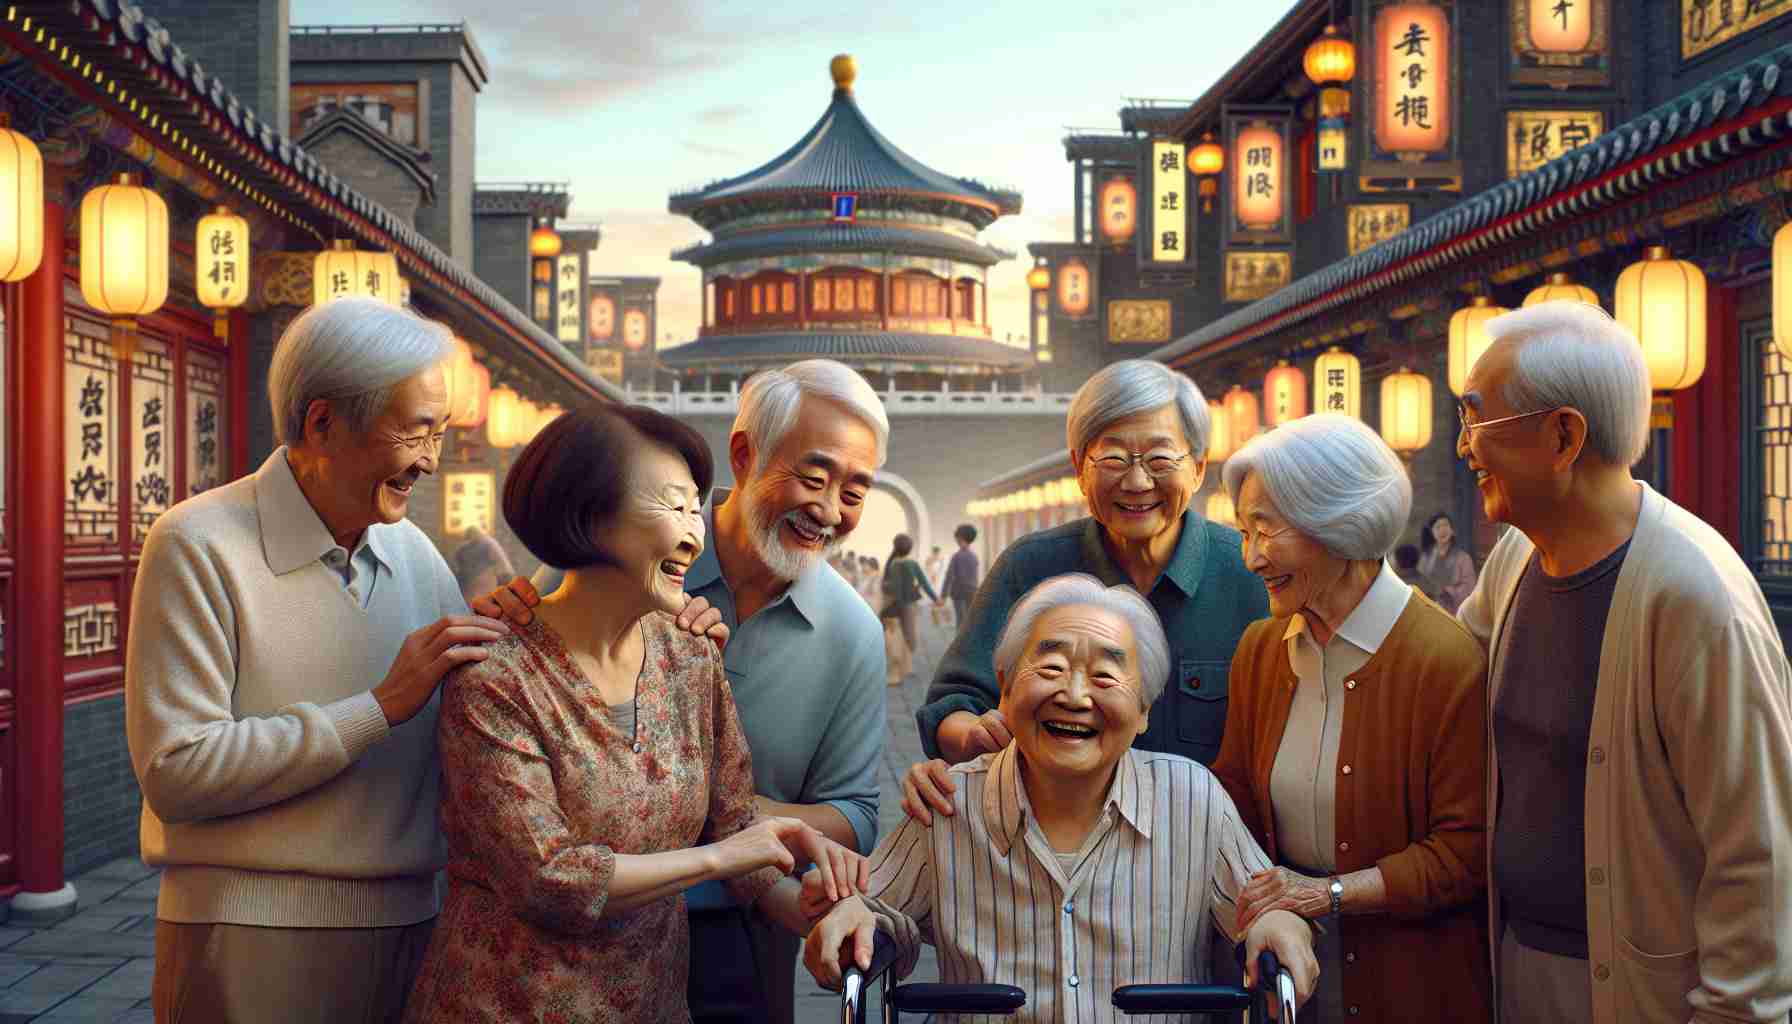 Heartwarming Ties: Elderly in Beijing Foster Enduring Friendships and Mutual Care